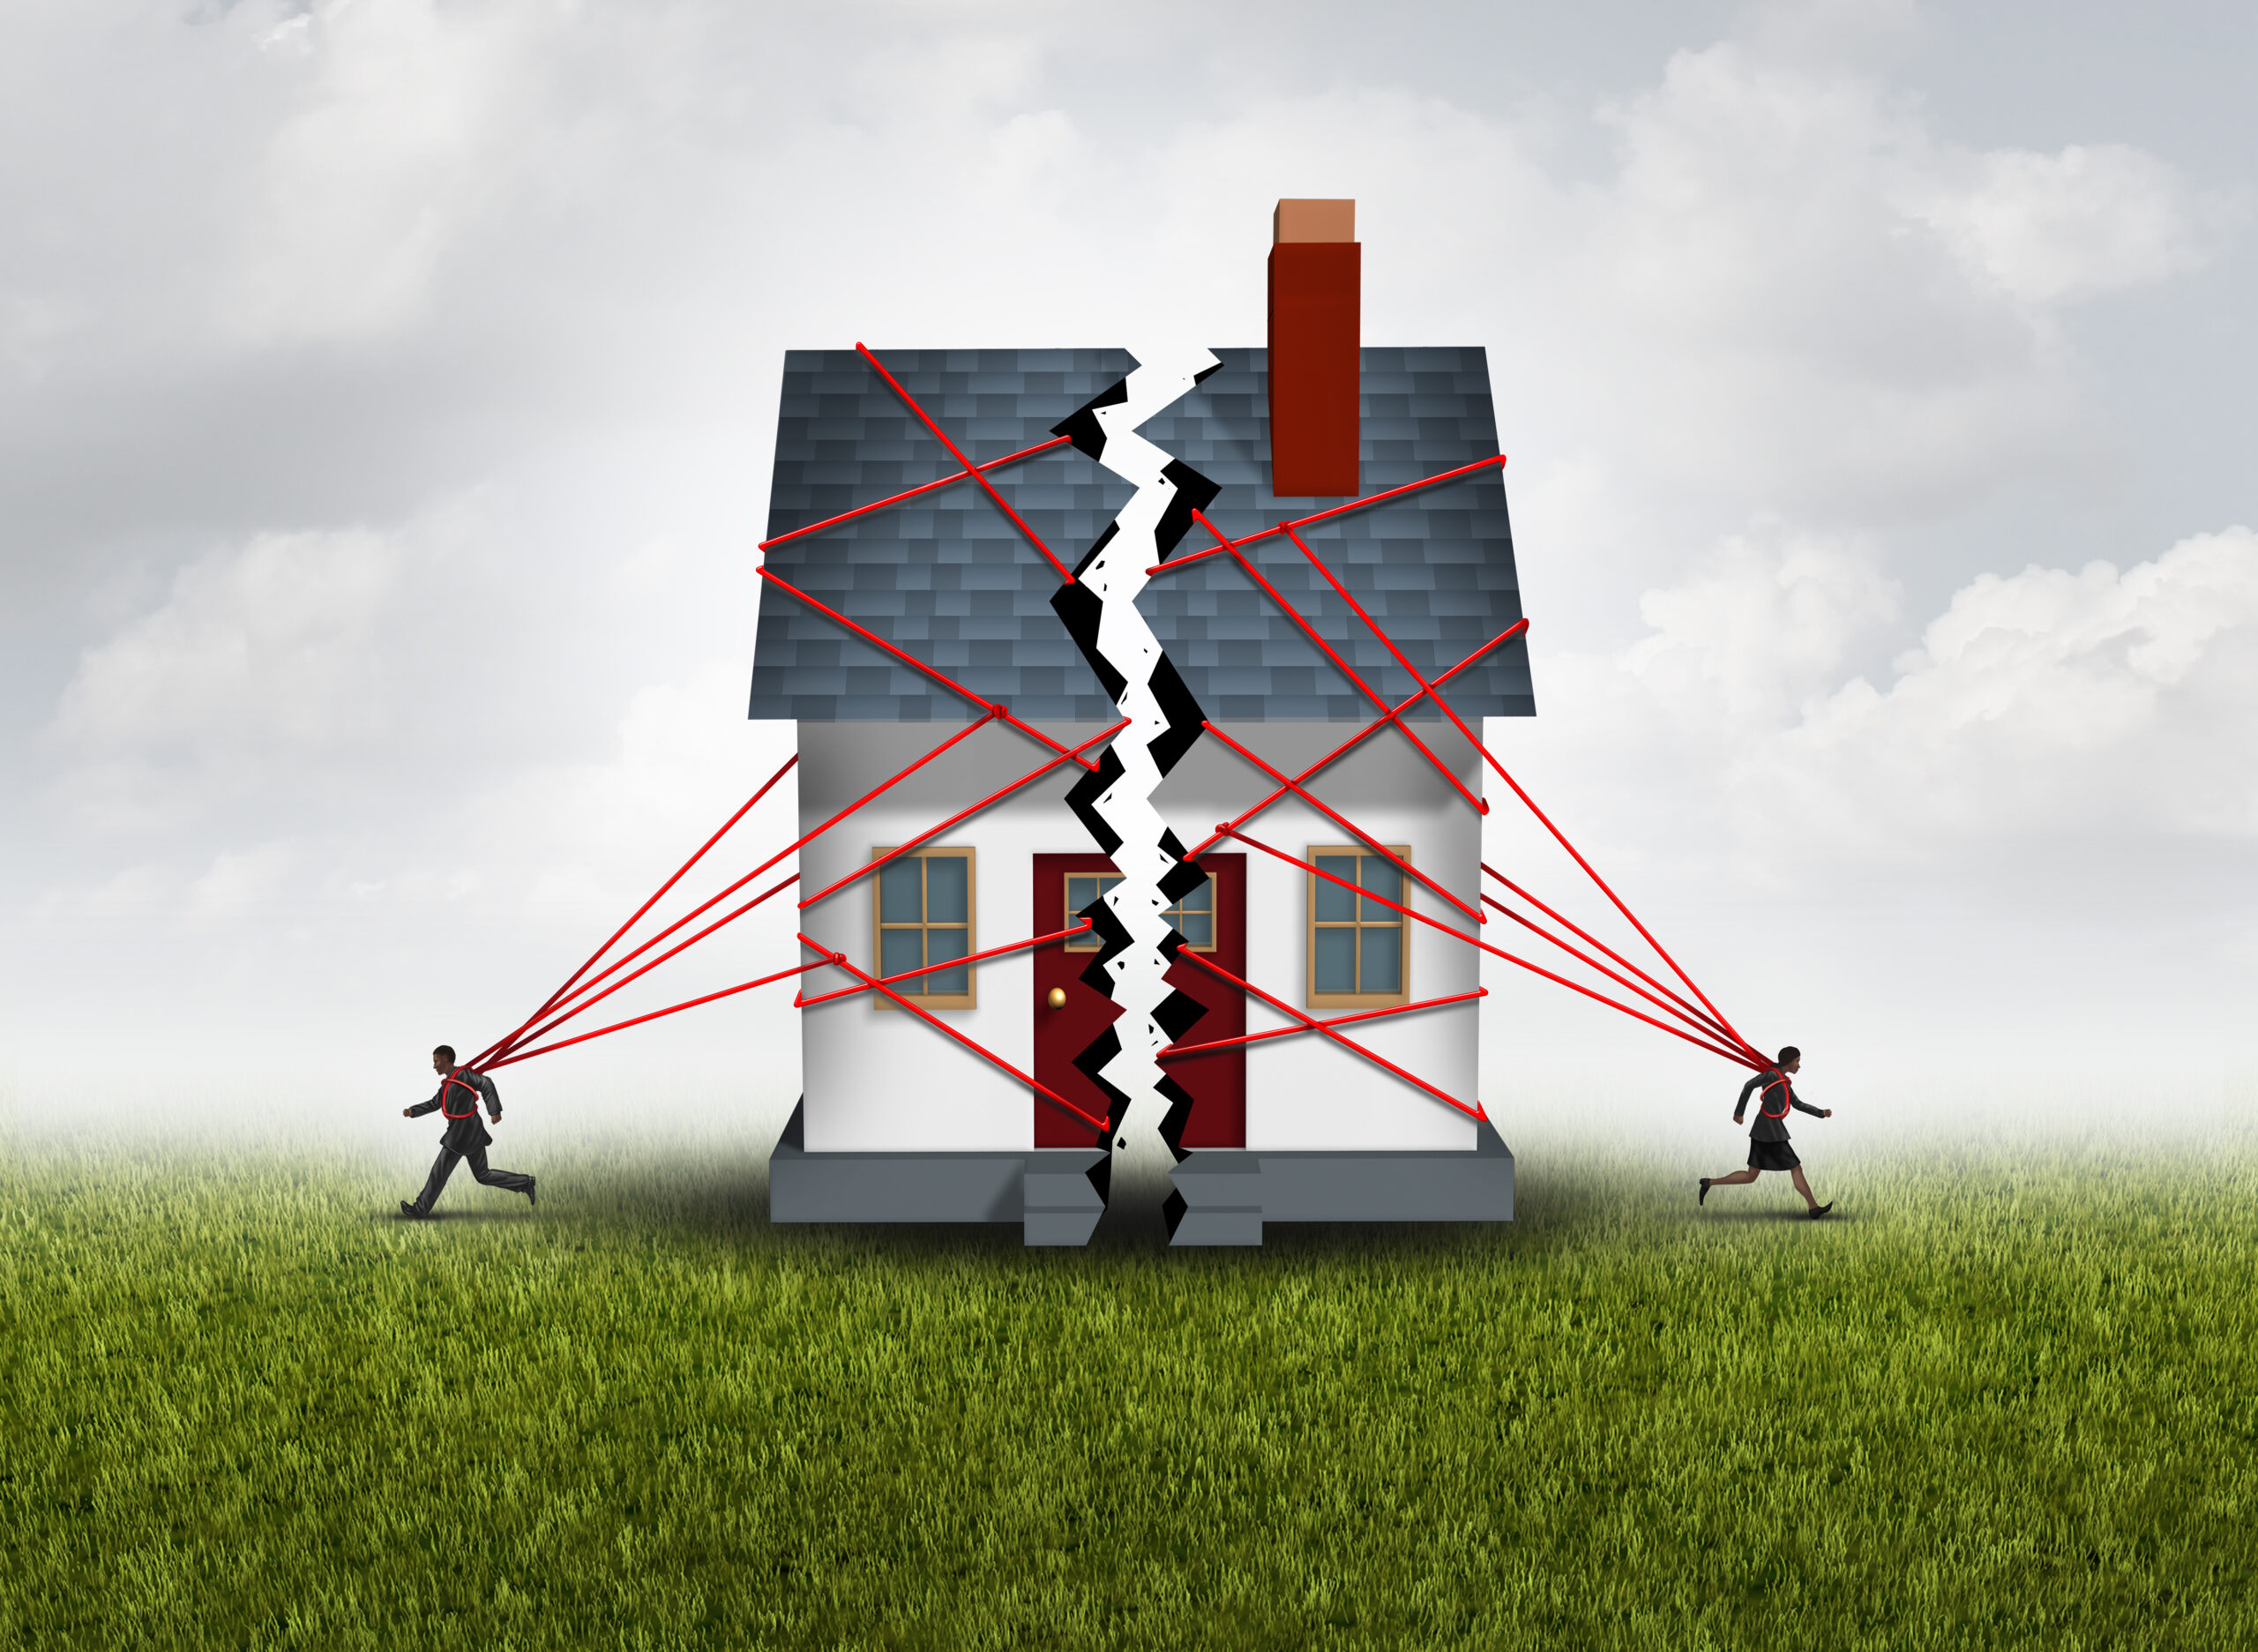 Illustration of a house being split in half, pulled in opposite directions by a person on each side